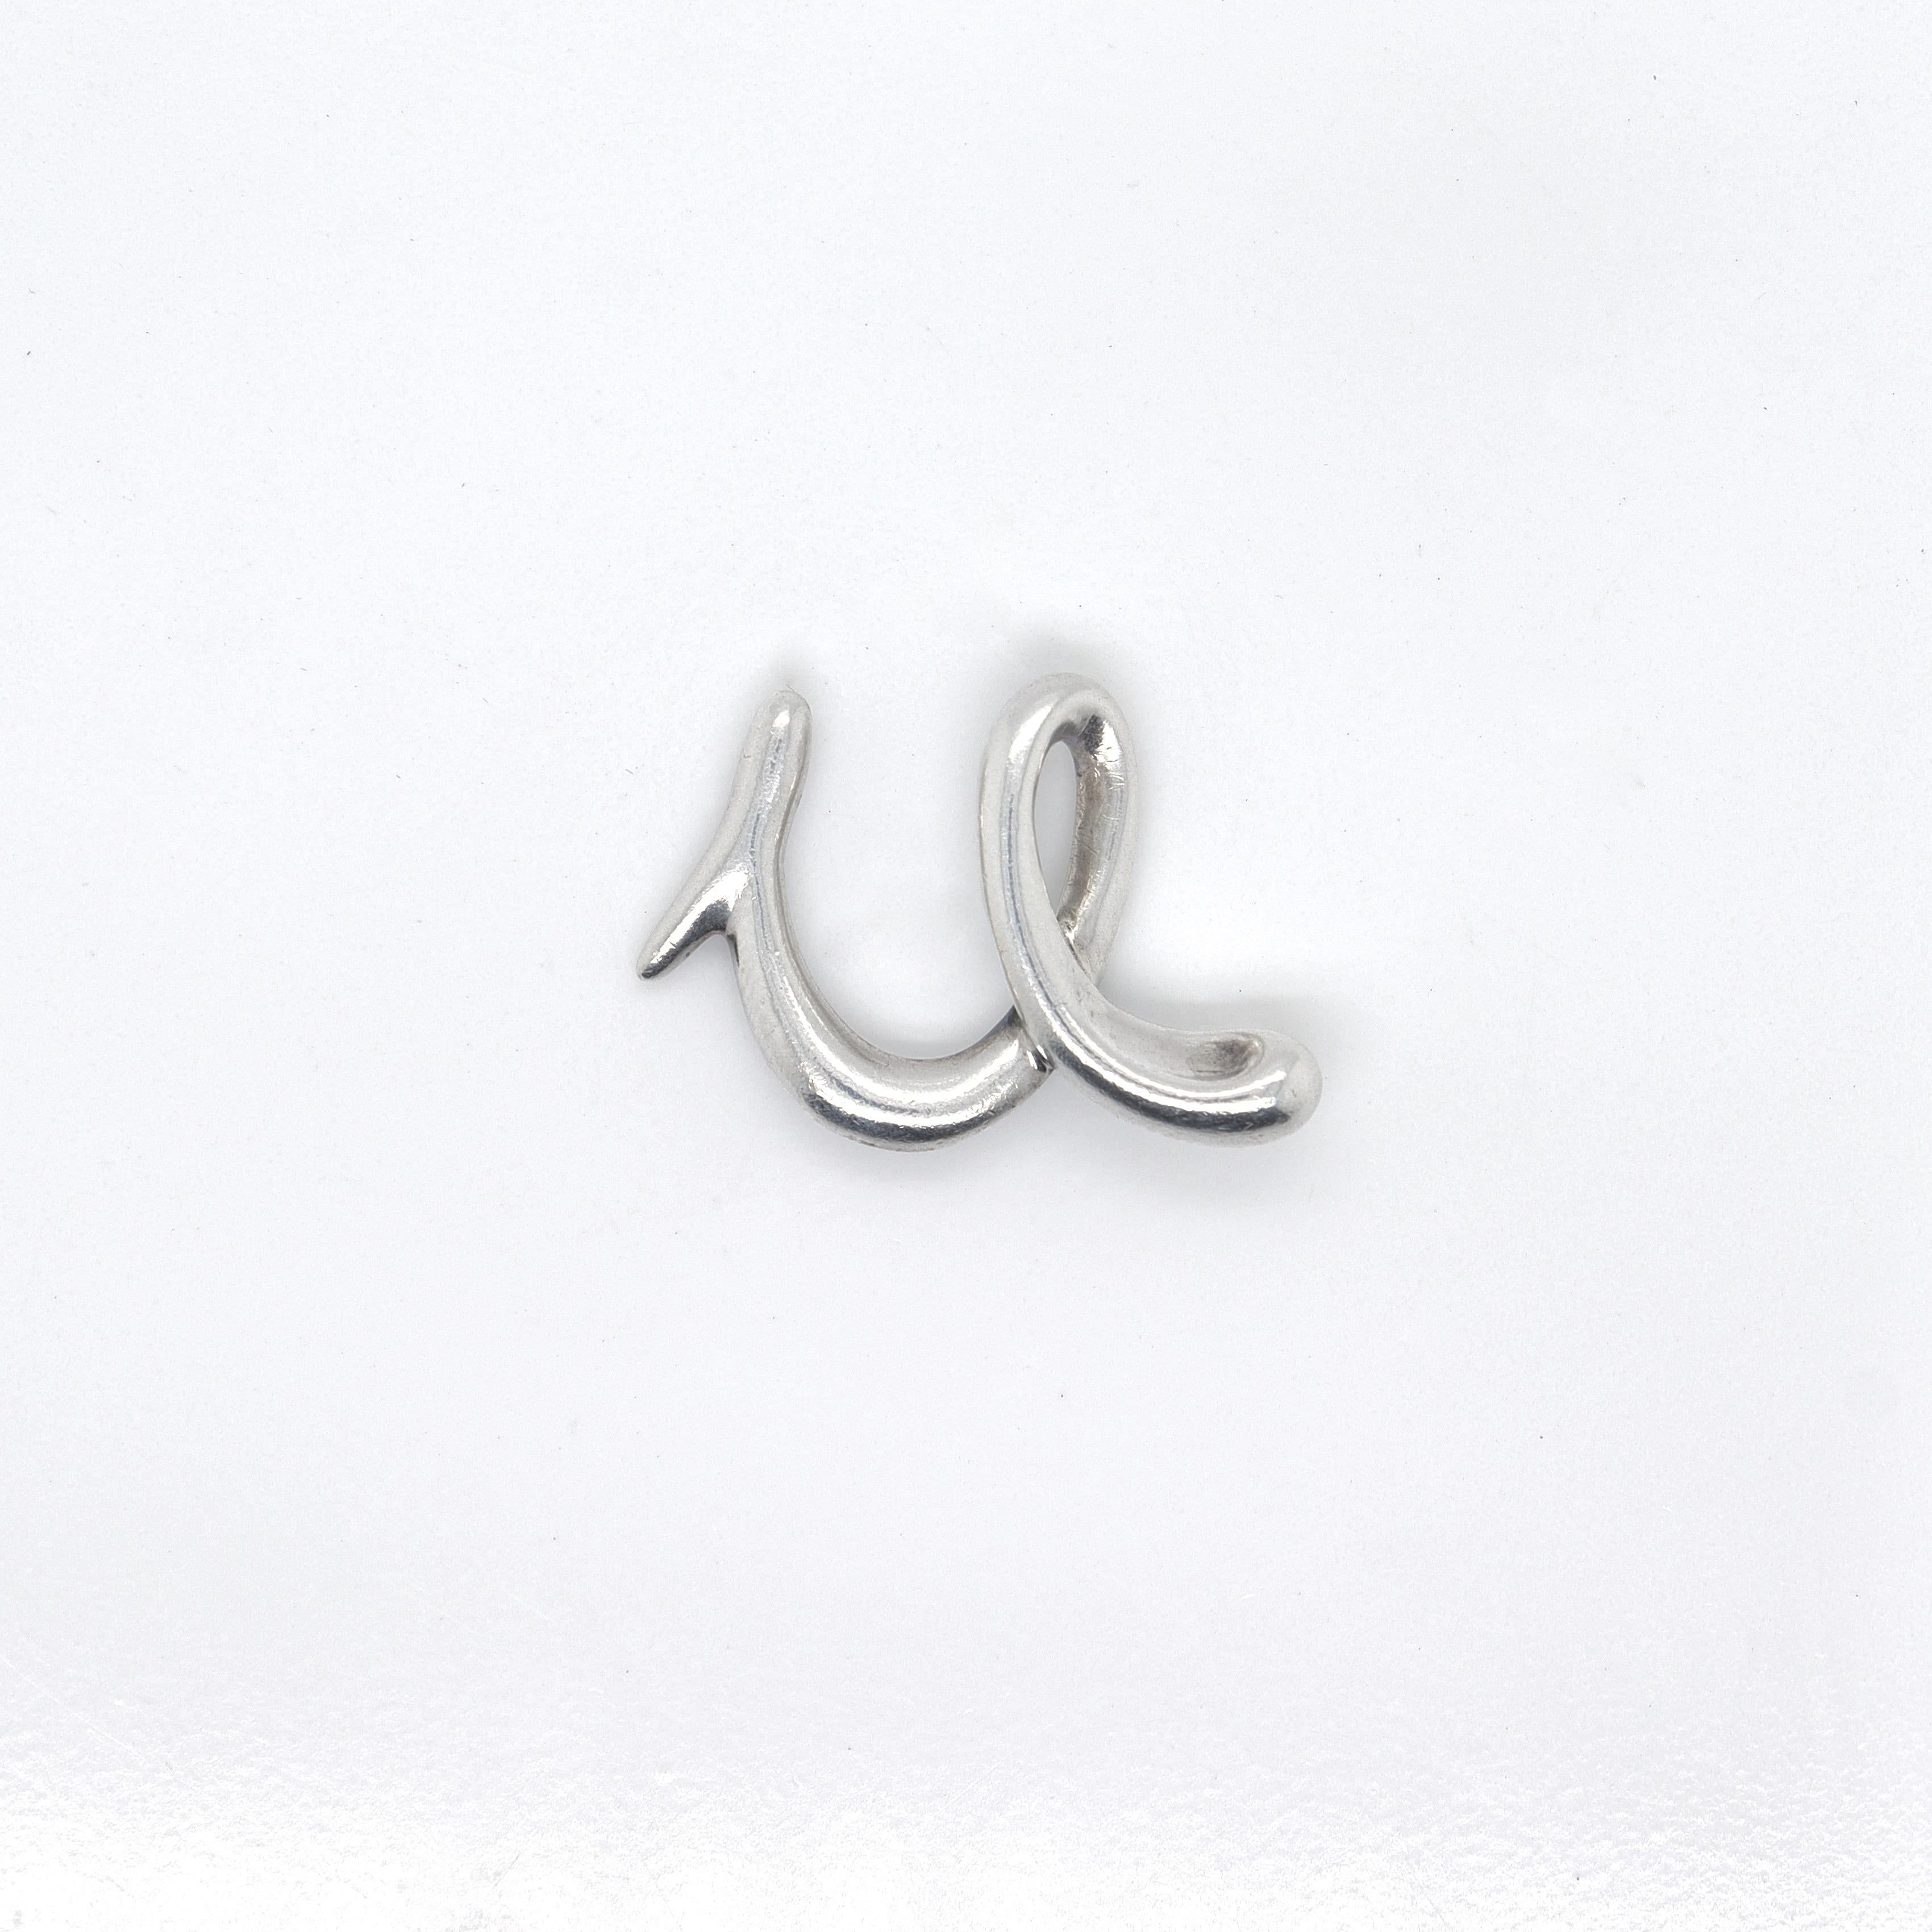 A fine Tiffany & Co. pendant for a necklace.

Designed by Elsa Peretti.

In sterling silver.

In the form of the letter 'u'. 

Simply great Tiffany design!

Date:
Late 20th Century

Overall Condition:
It is in overall good, as-pictured, used estate